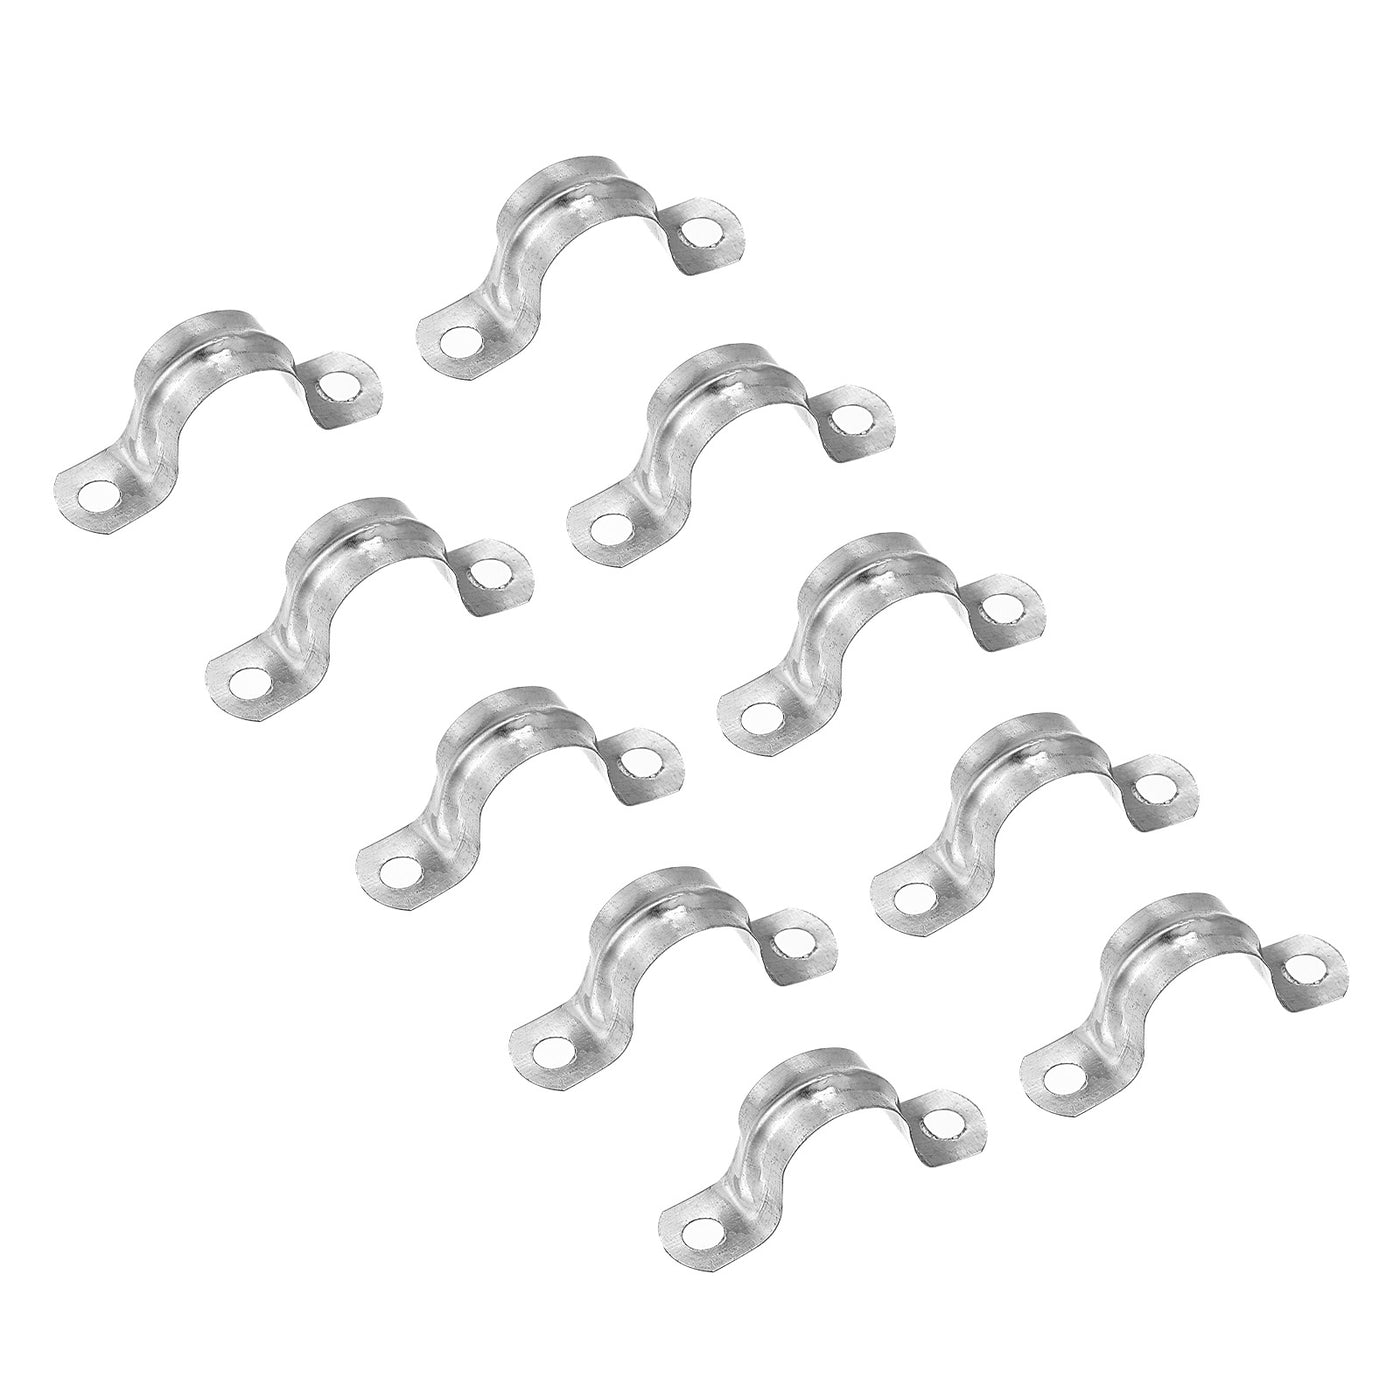 uxcell Uxcell Rigid Pipe Strap 24pcs 3/4" (20mm) Carbon Steel U Bracket Tension Tube Clamp